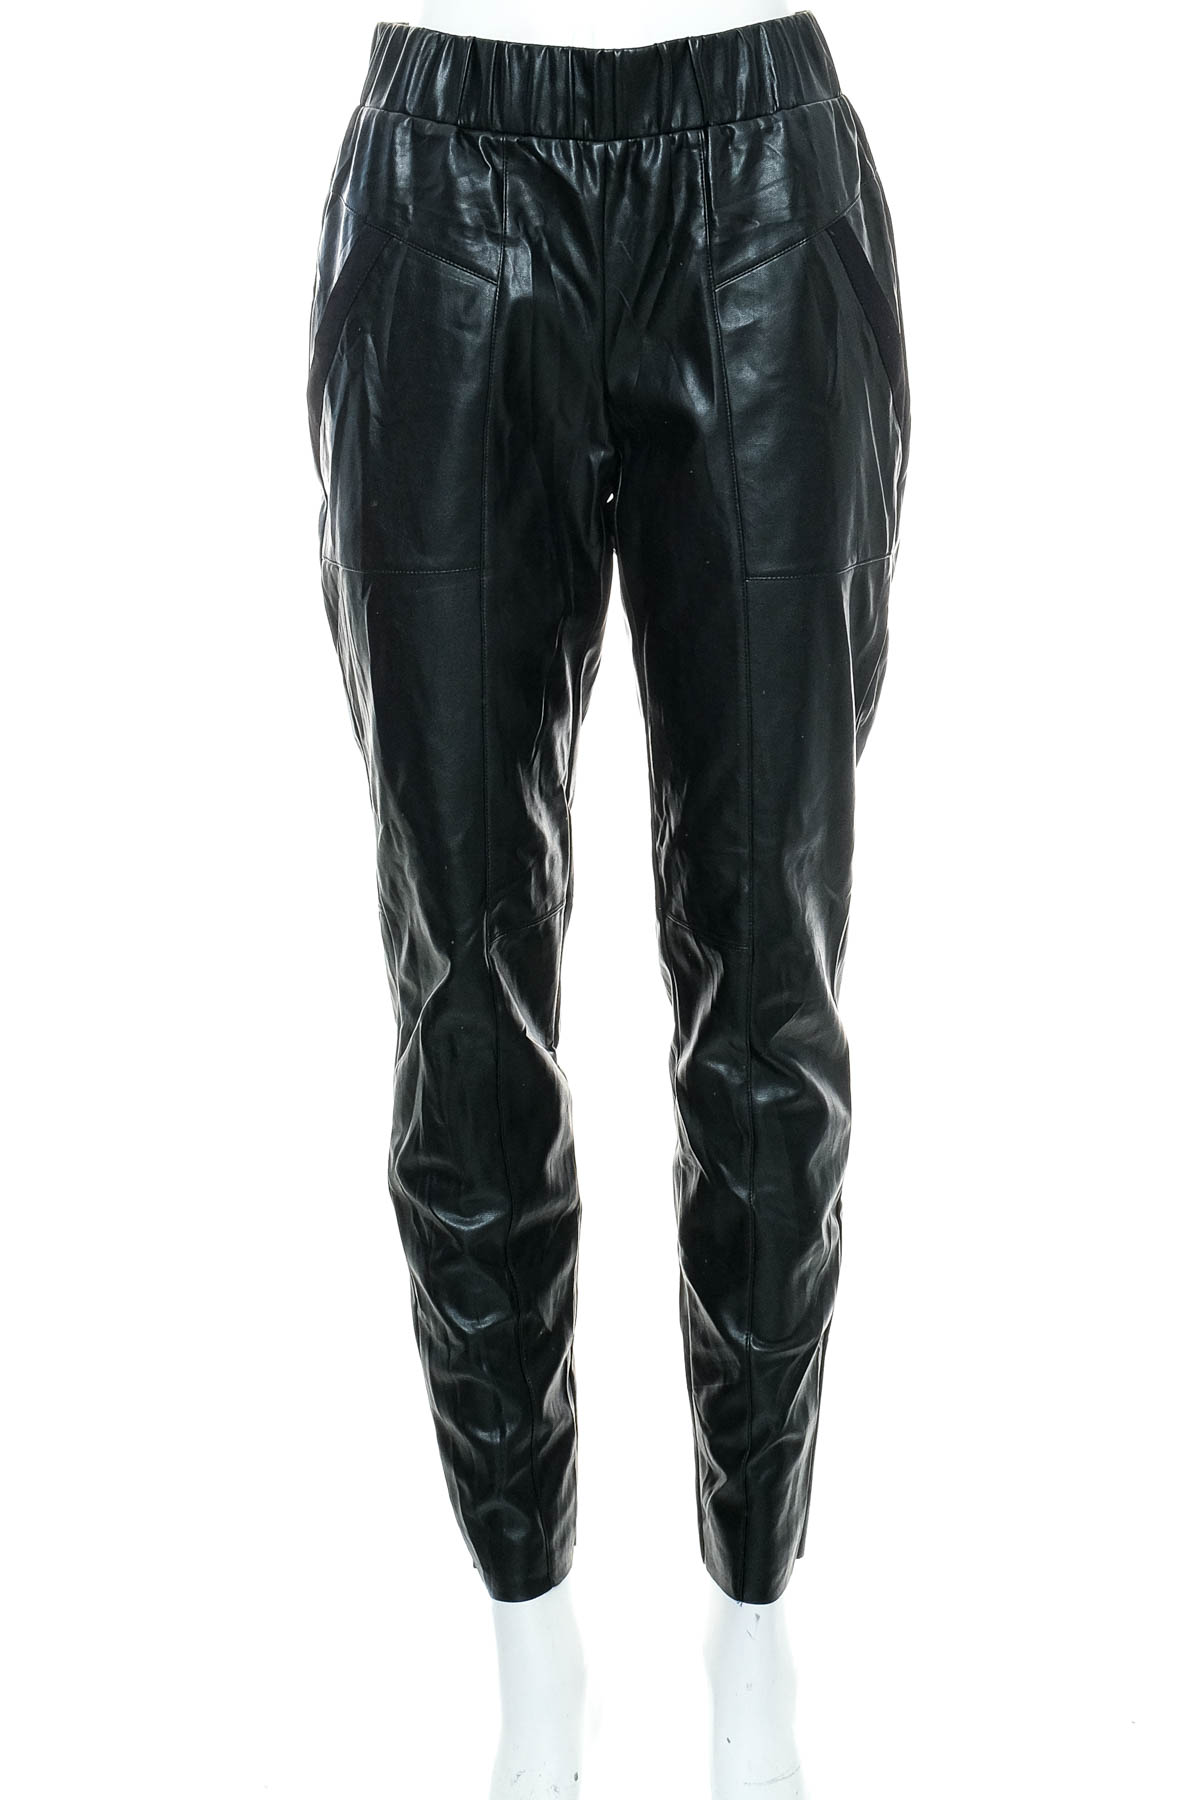 Women's leather trousers - MARC CAIN - 0